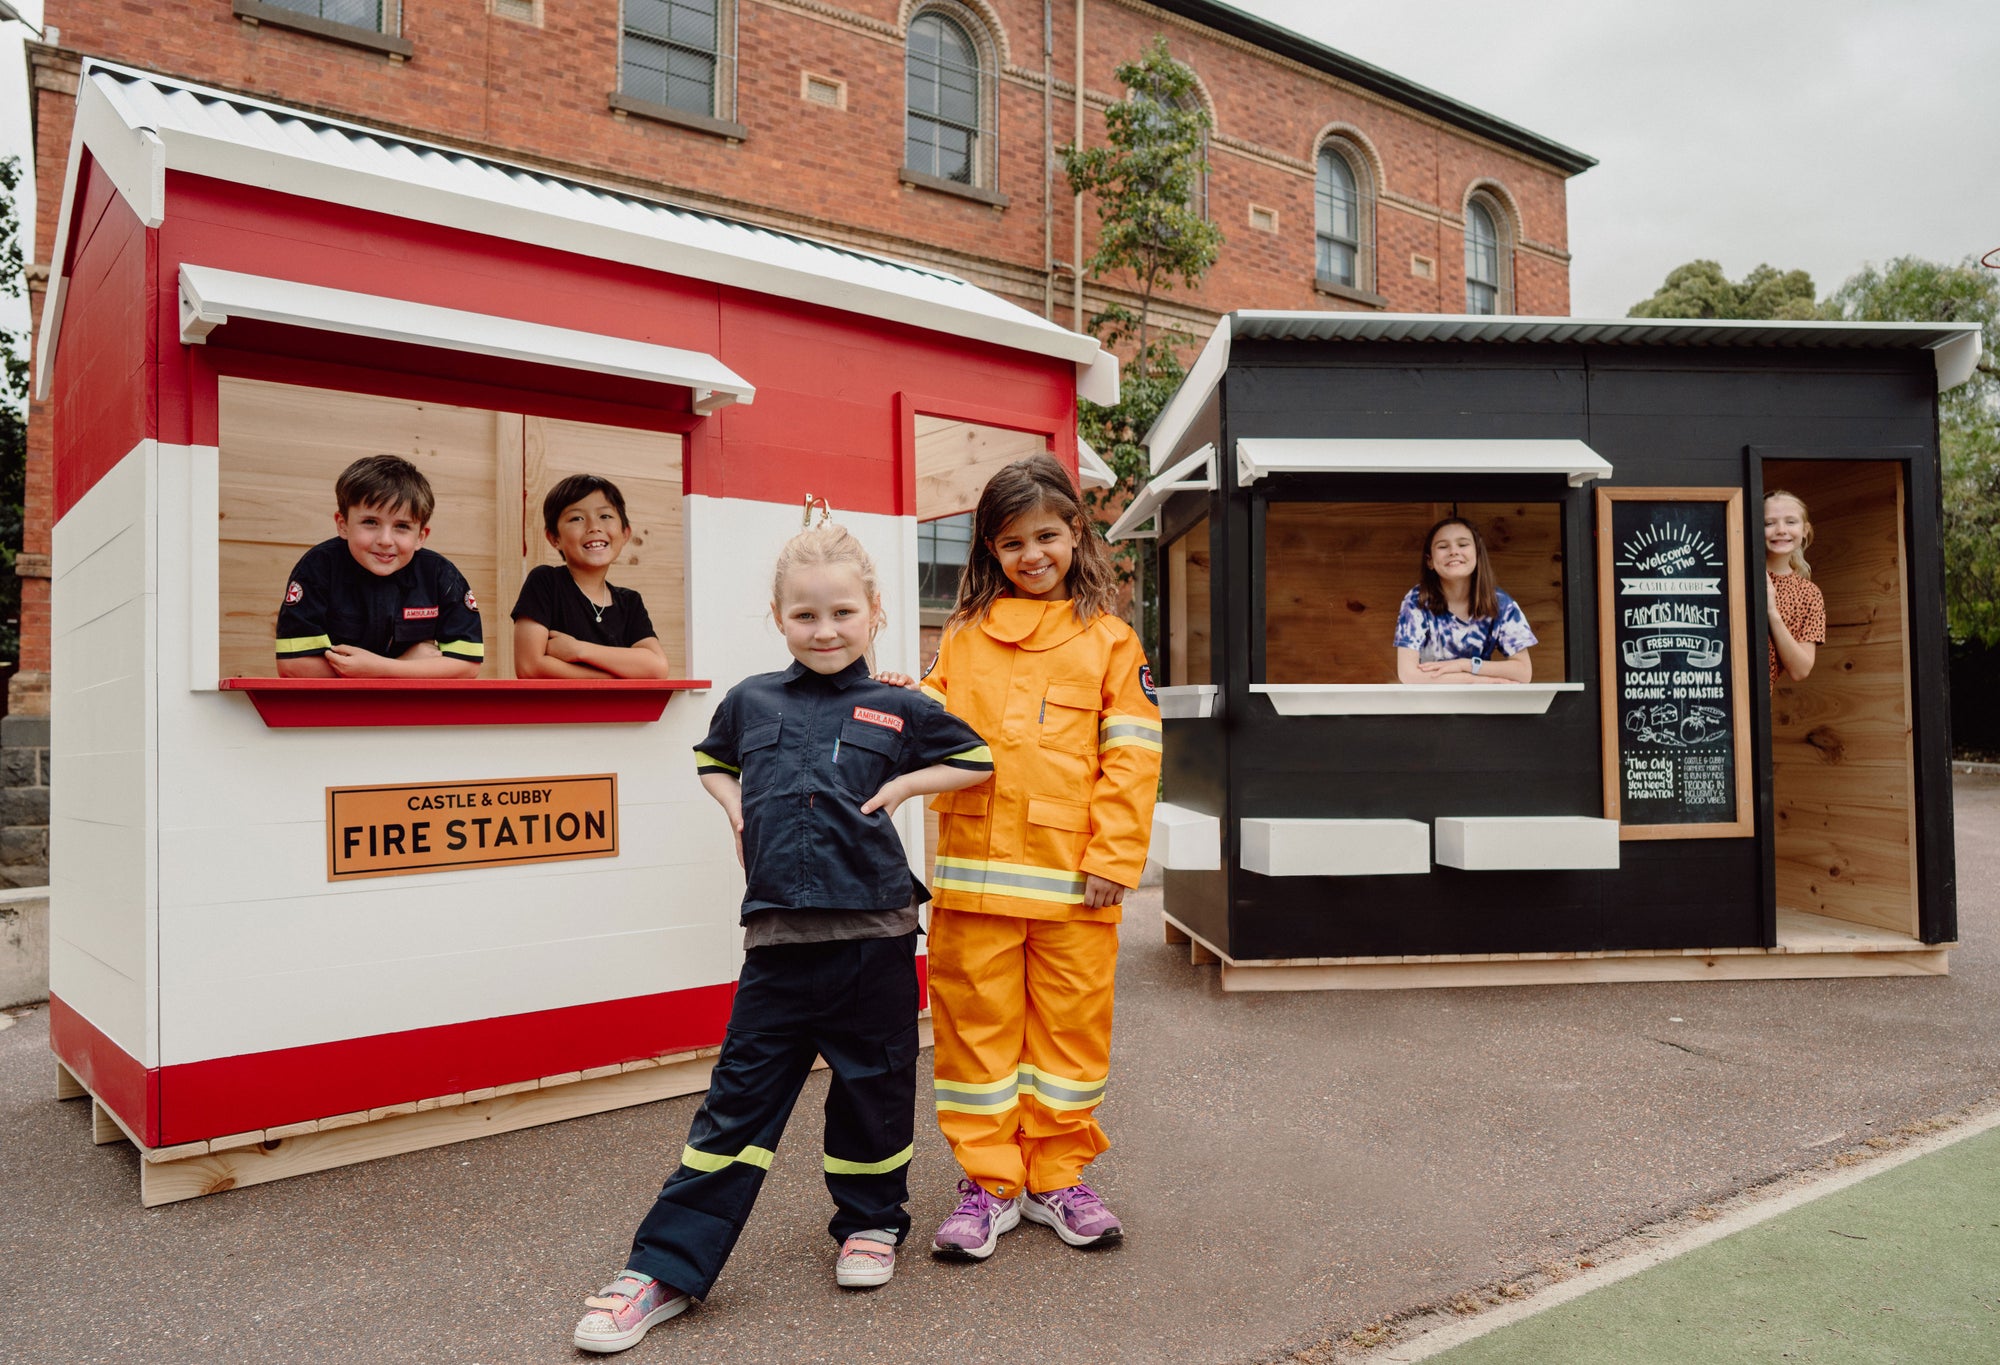 Imagination play with themed cubby houses, fire station and farmer's market